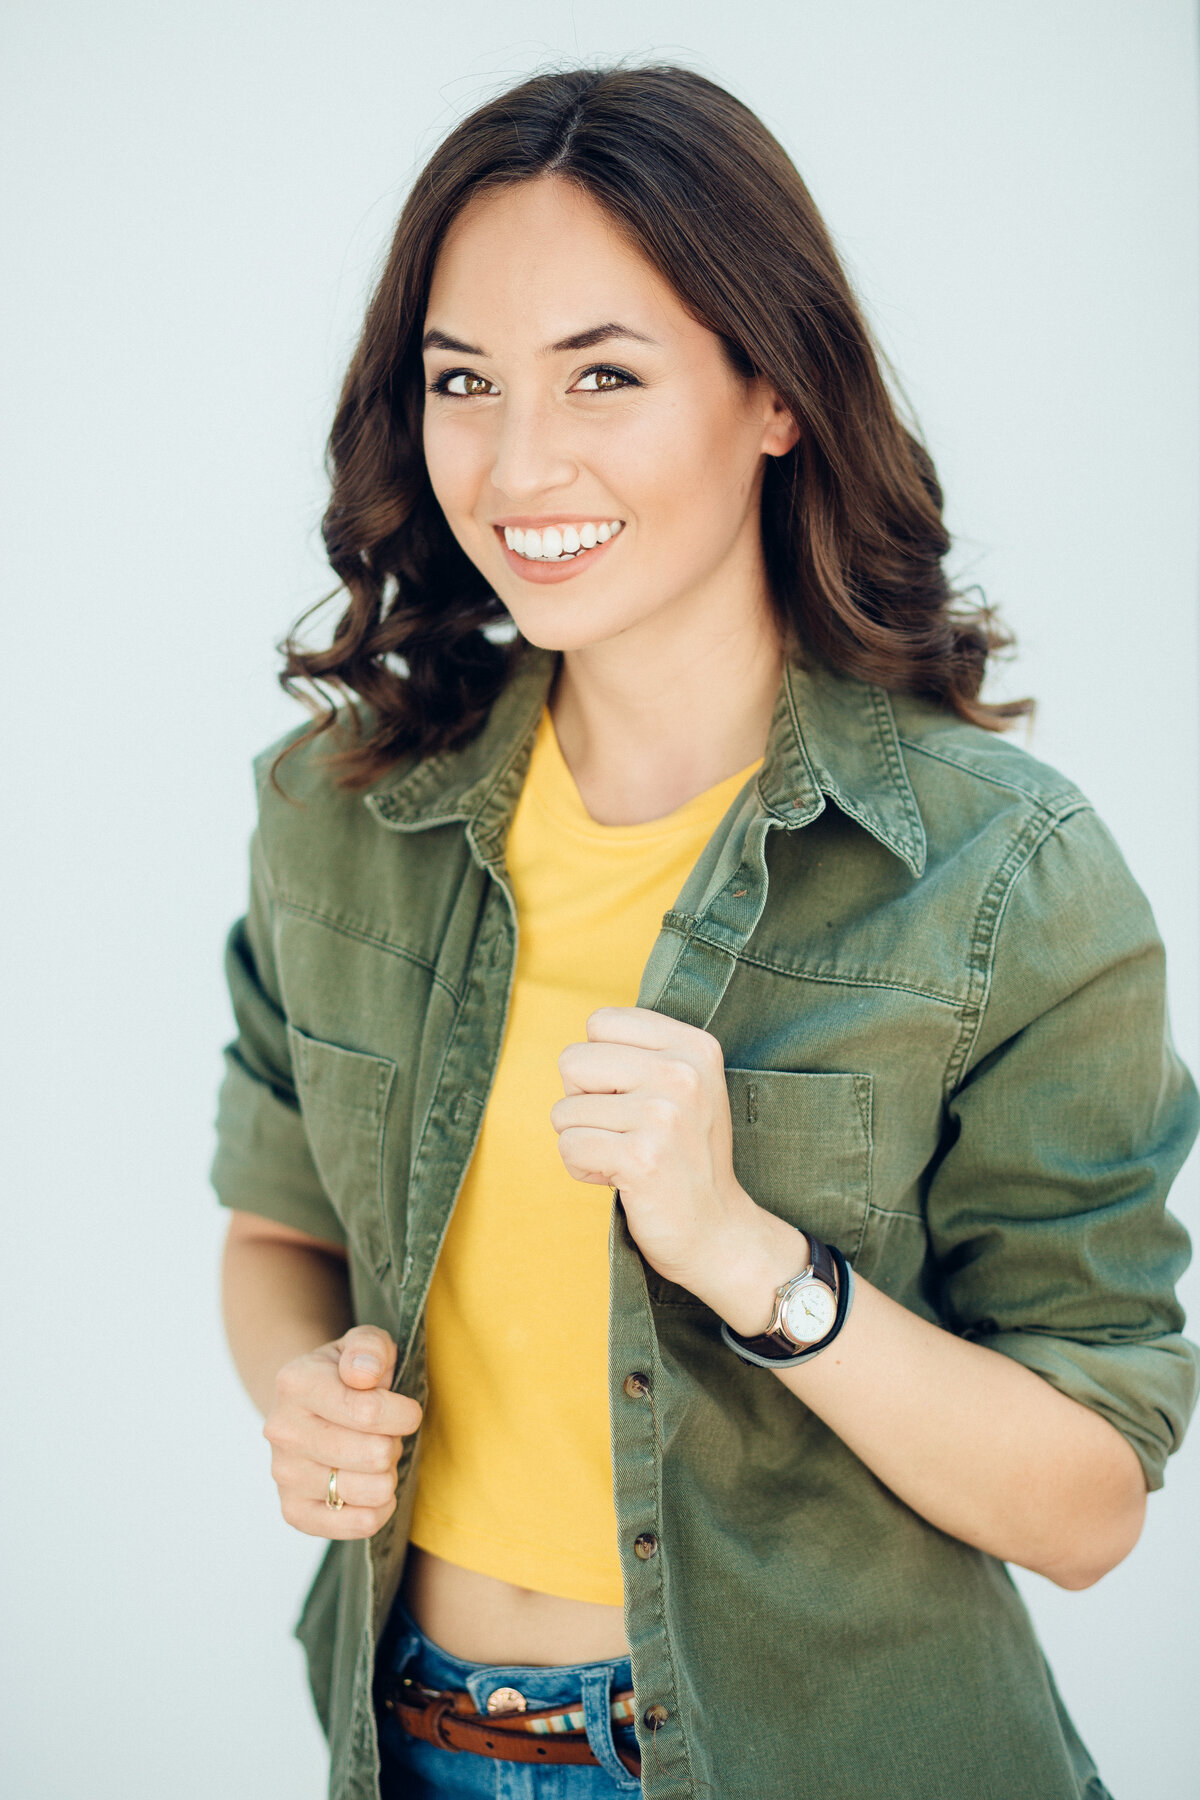 Headshot Photograph Of Young Woman In Army Green Jacket And Inner Yellow Crop Top Los Angeles